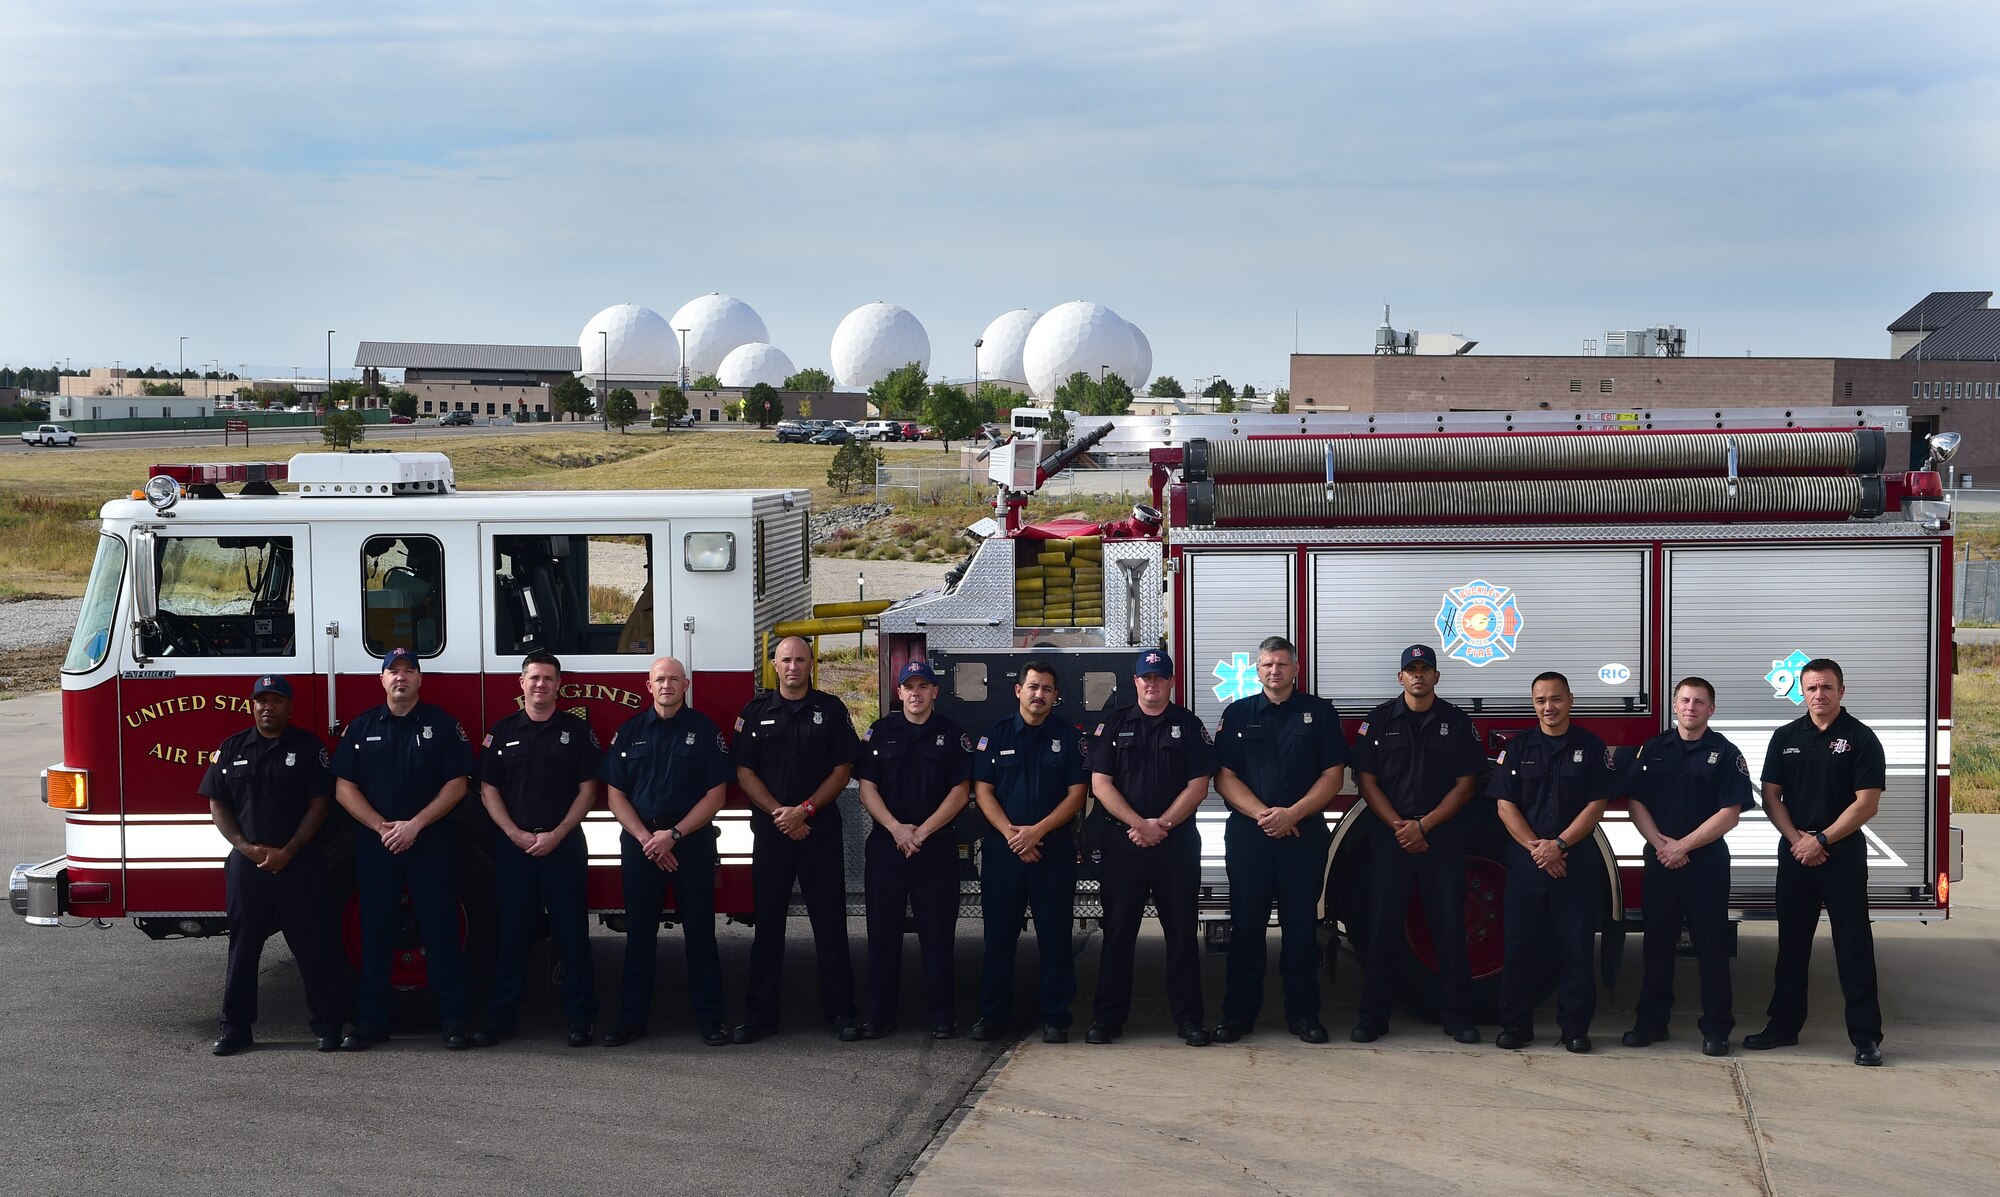 The Buckley Fire Department poses for a photograph Sept. 22, 2015, on Buckley Air Force Base, Colo. The fire department was recently given permission by Air Force officials to resume the use of paramedics on base, cutting response times in half and allowing fire department personnel to use their capabilities to the fullest. (U.S. Air Force photo by Airman 1st Class Luke W. Nowakowski/Released)